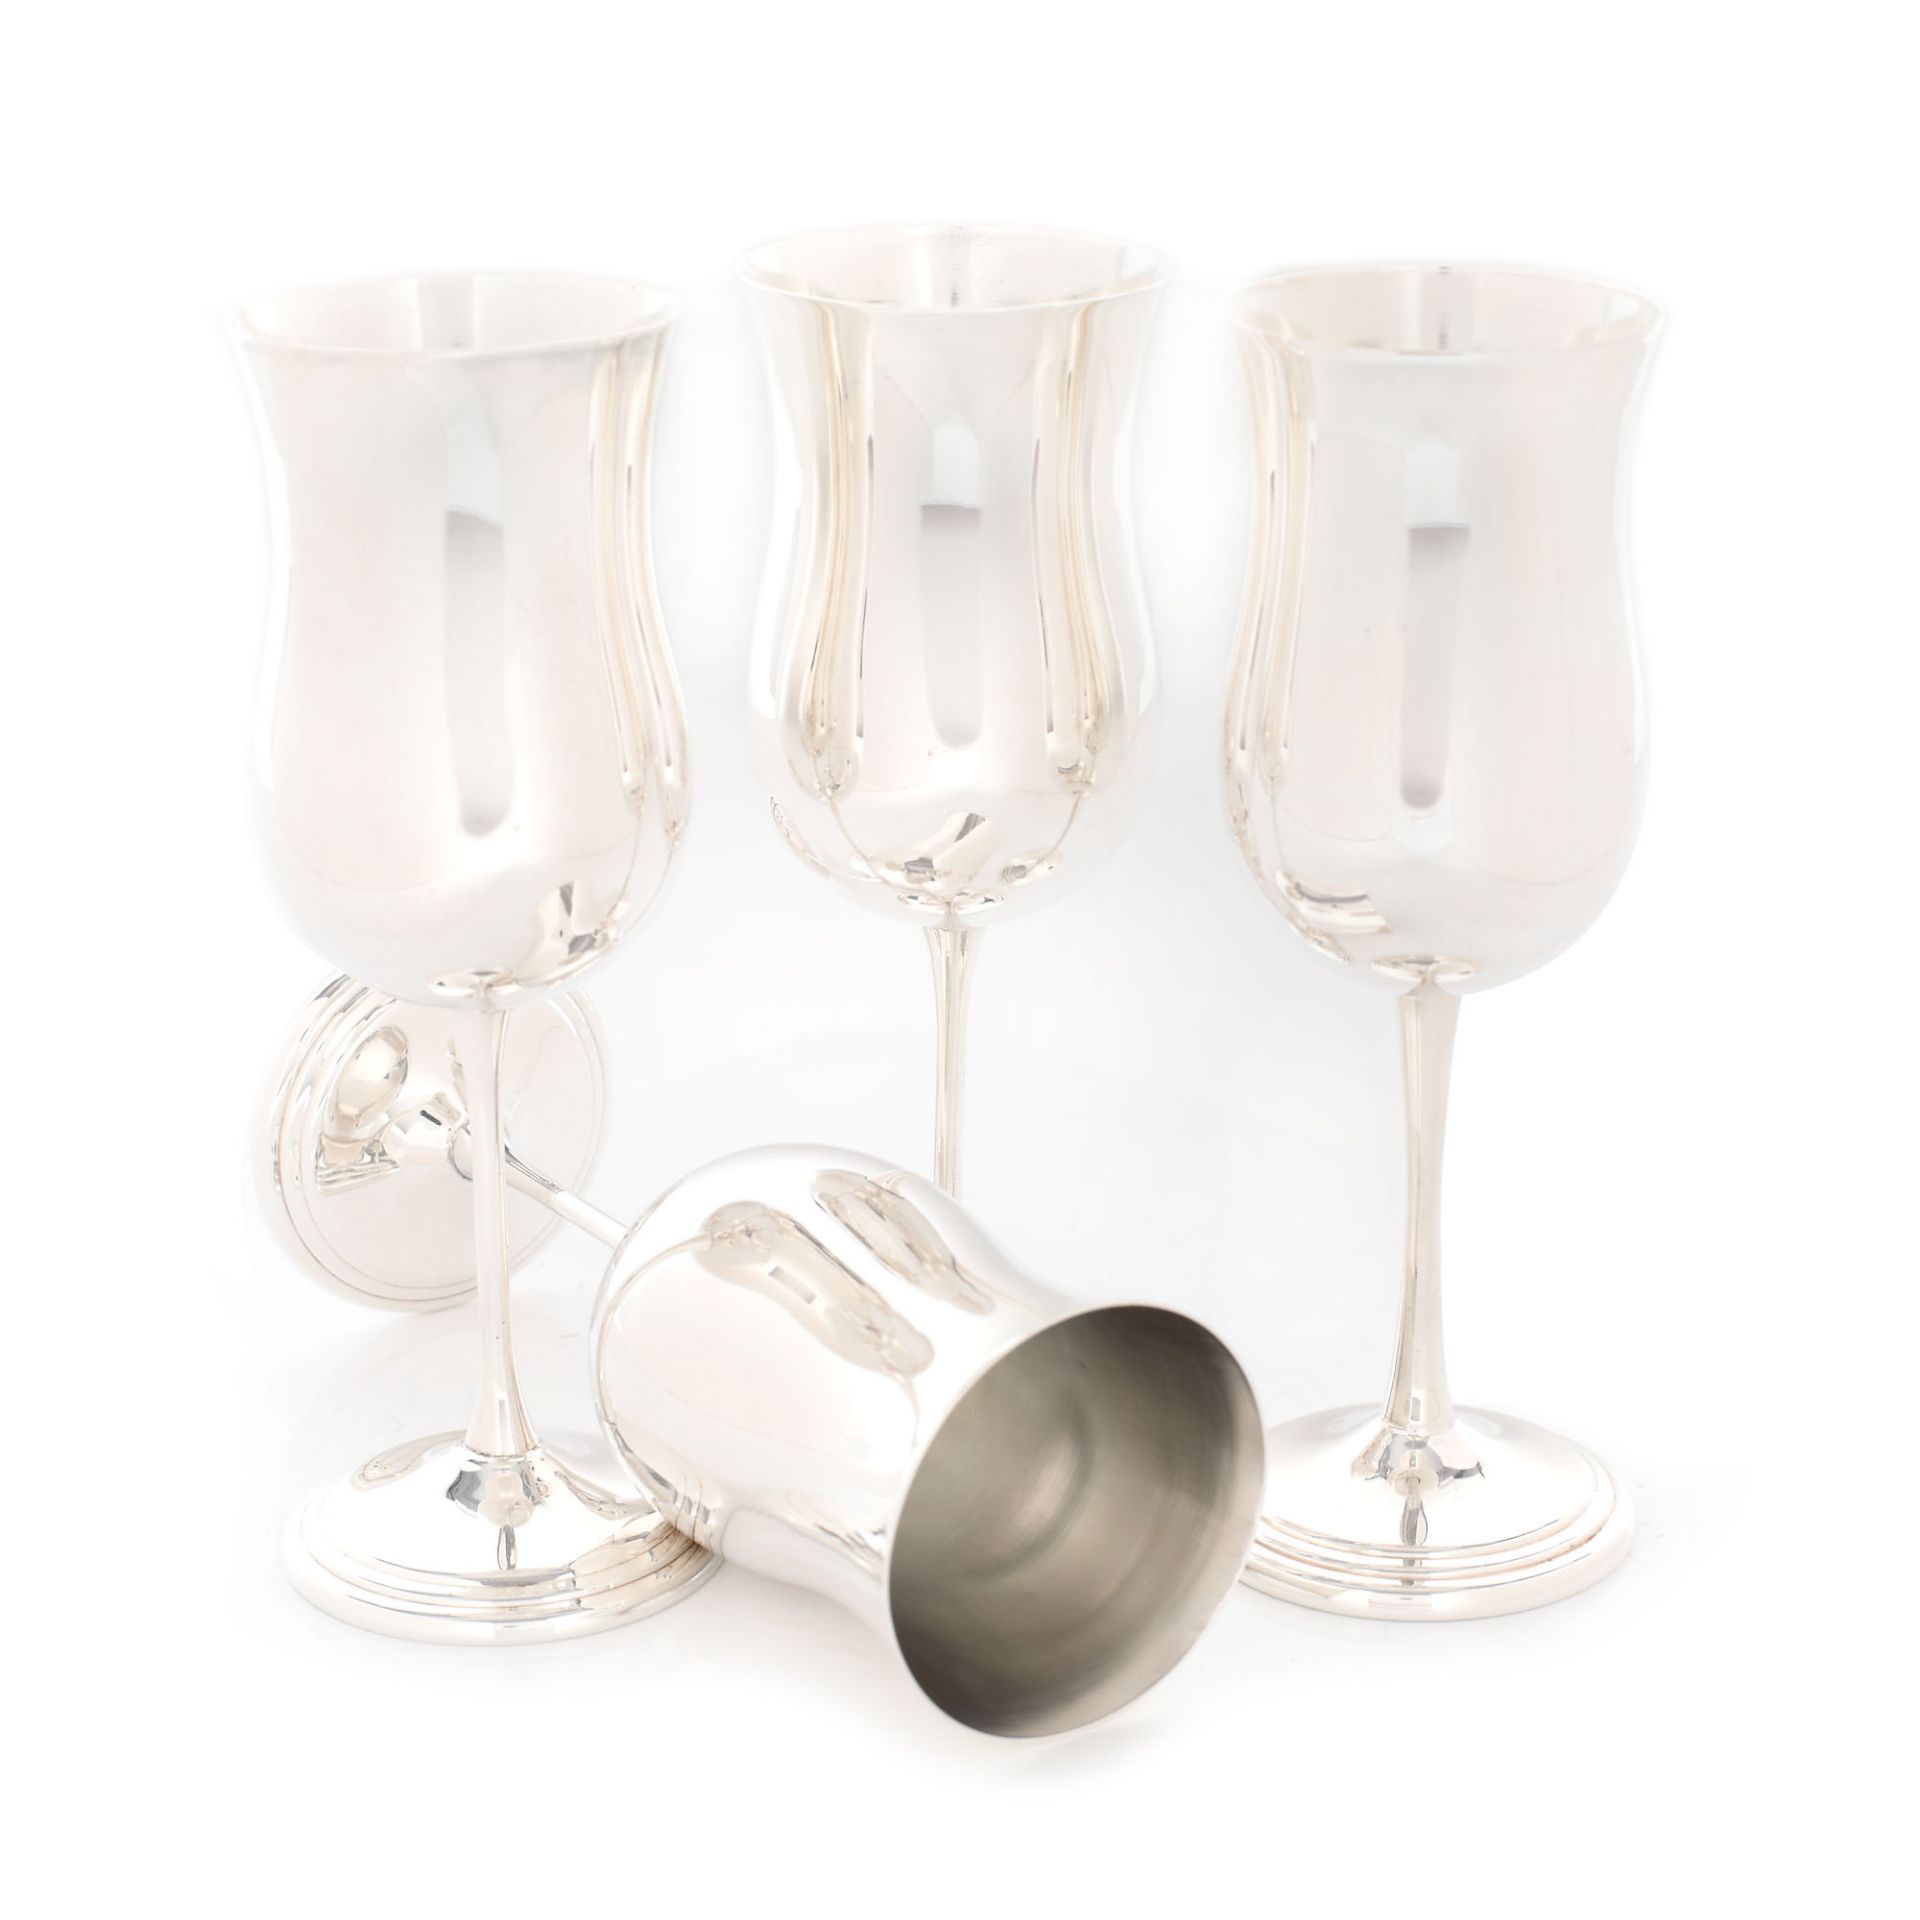 Padova workshop, Italy, Set of four silver glasses for wine - Image 2 of 3